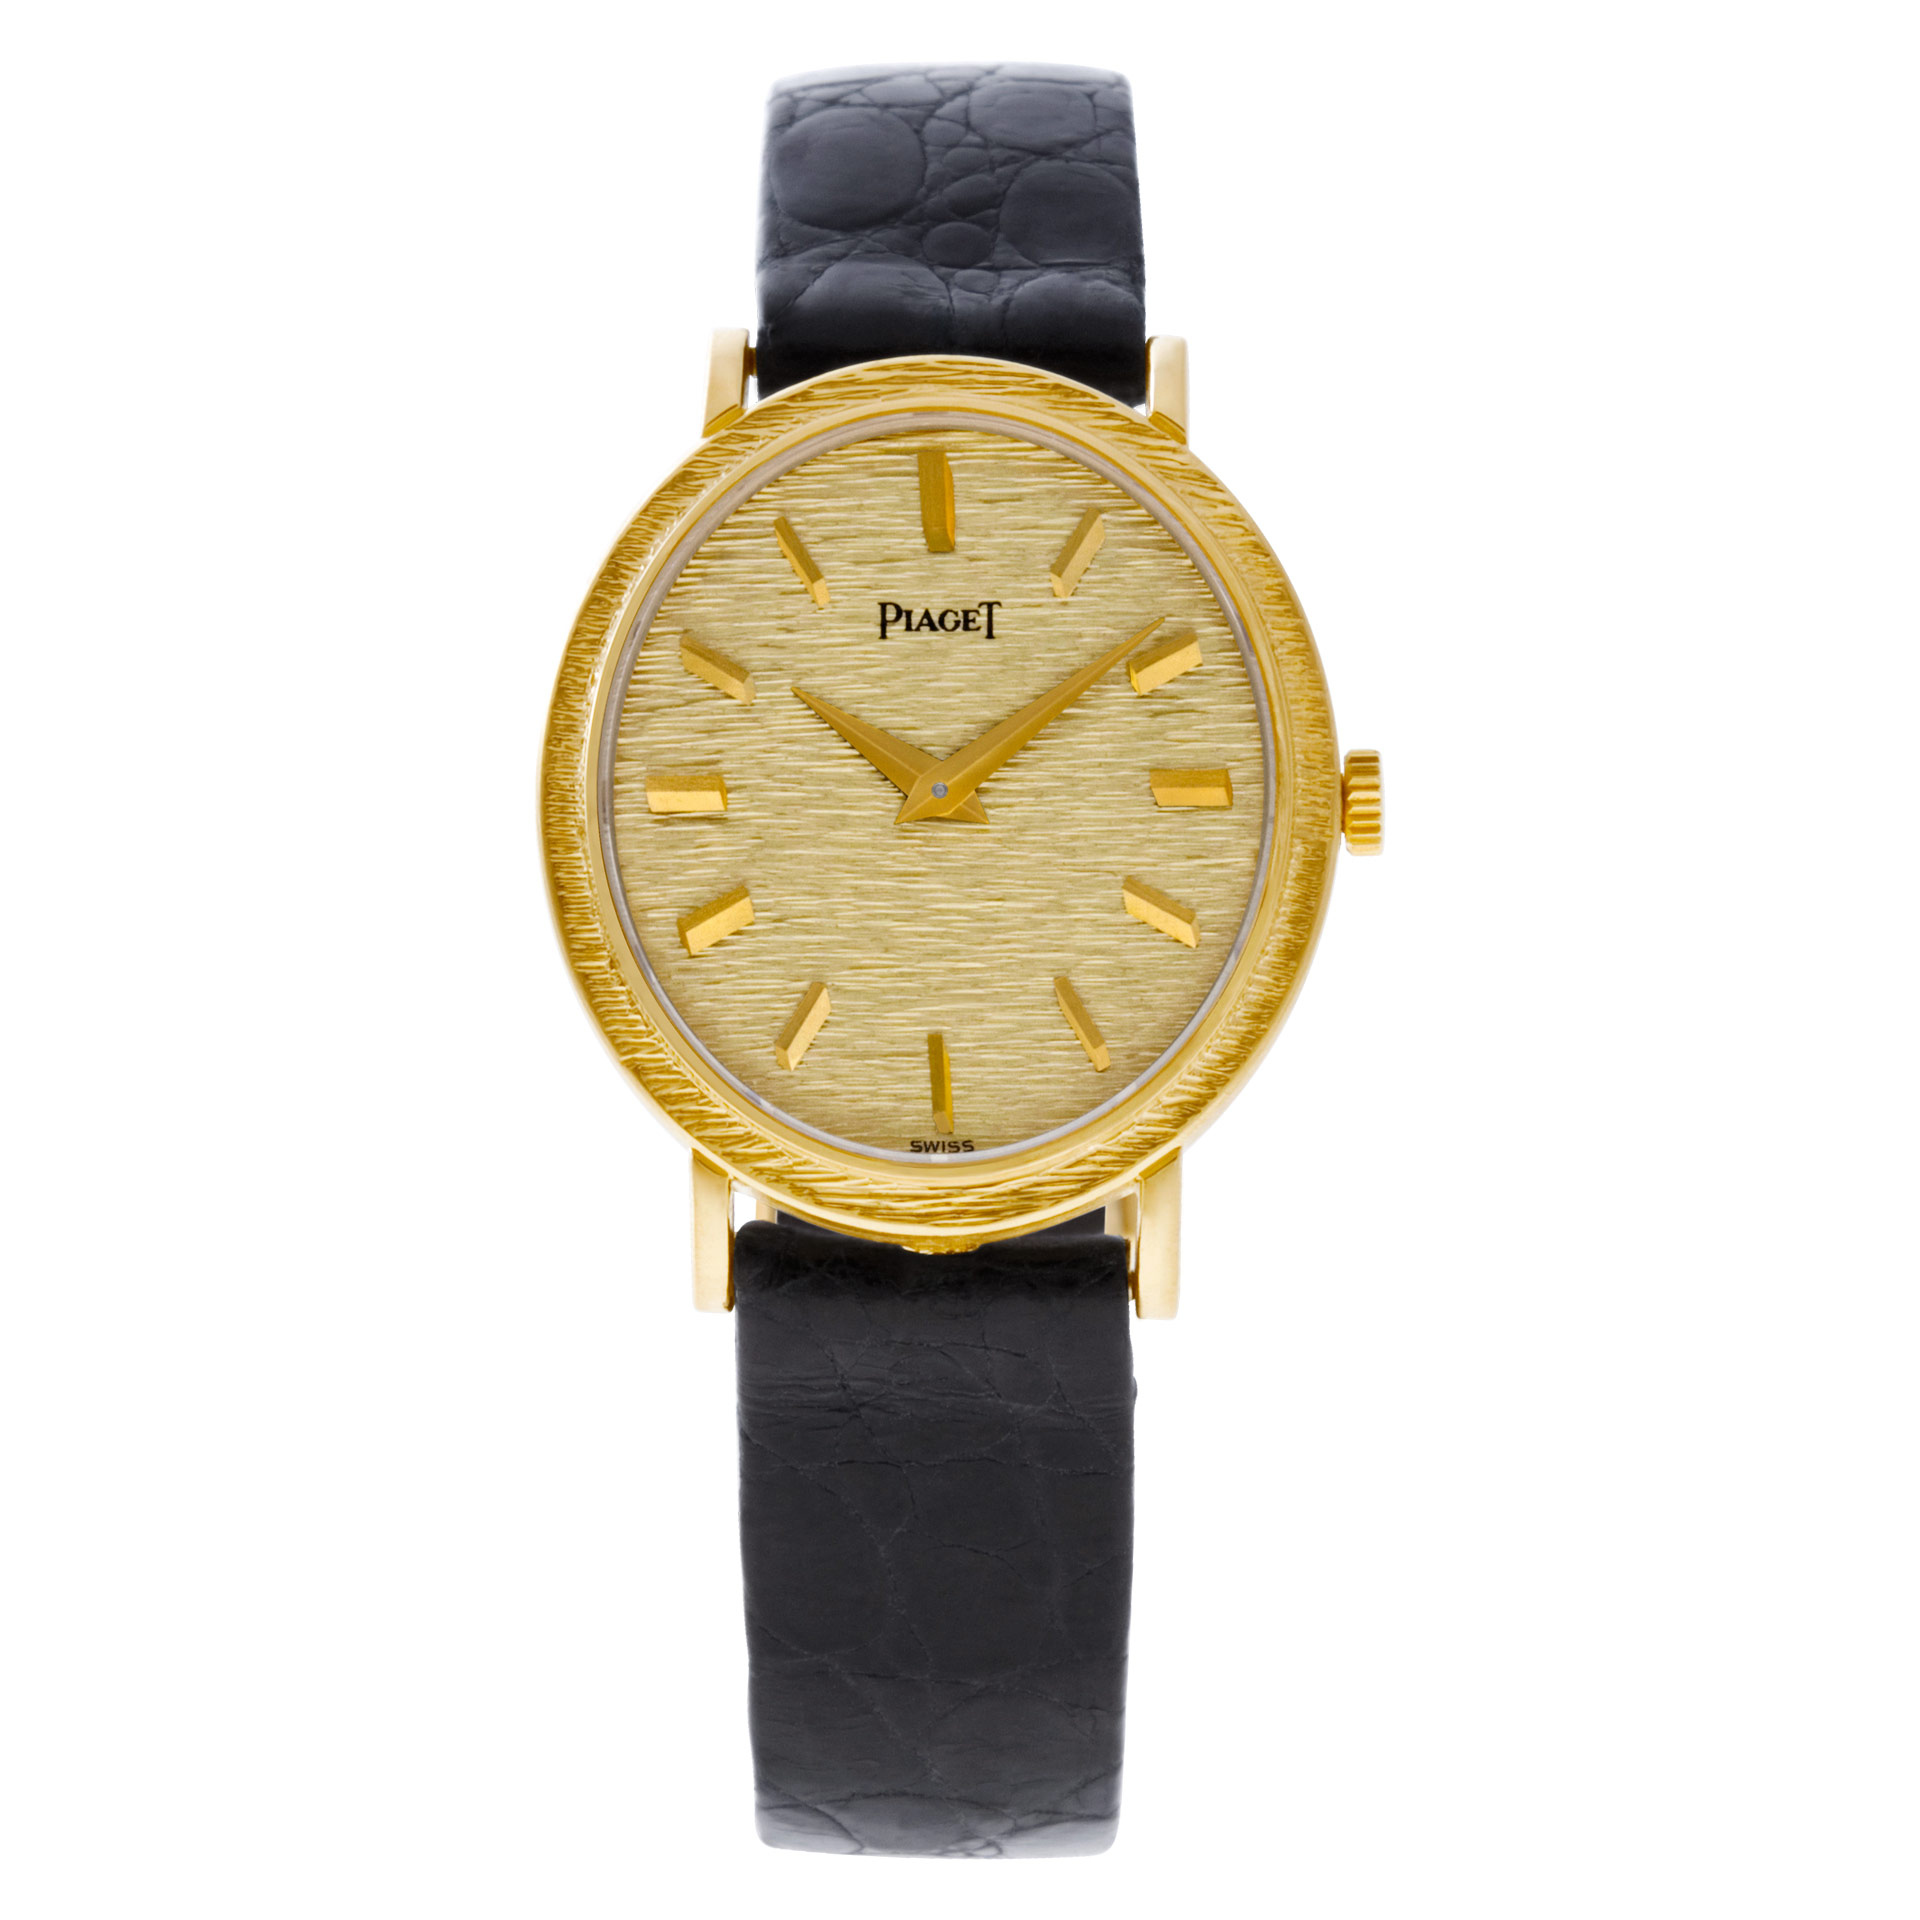 Piaget Oval 17mm 9821